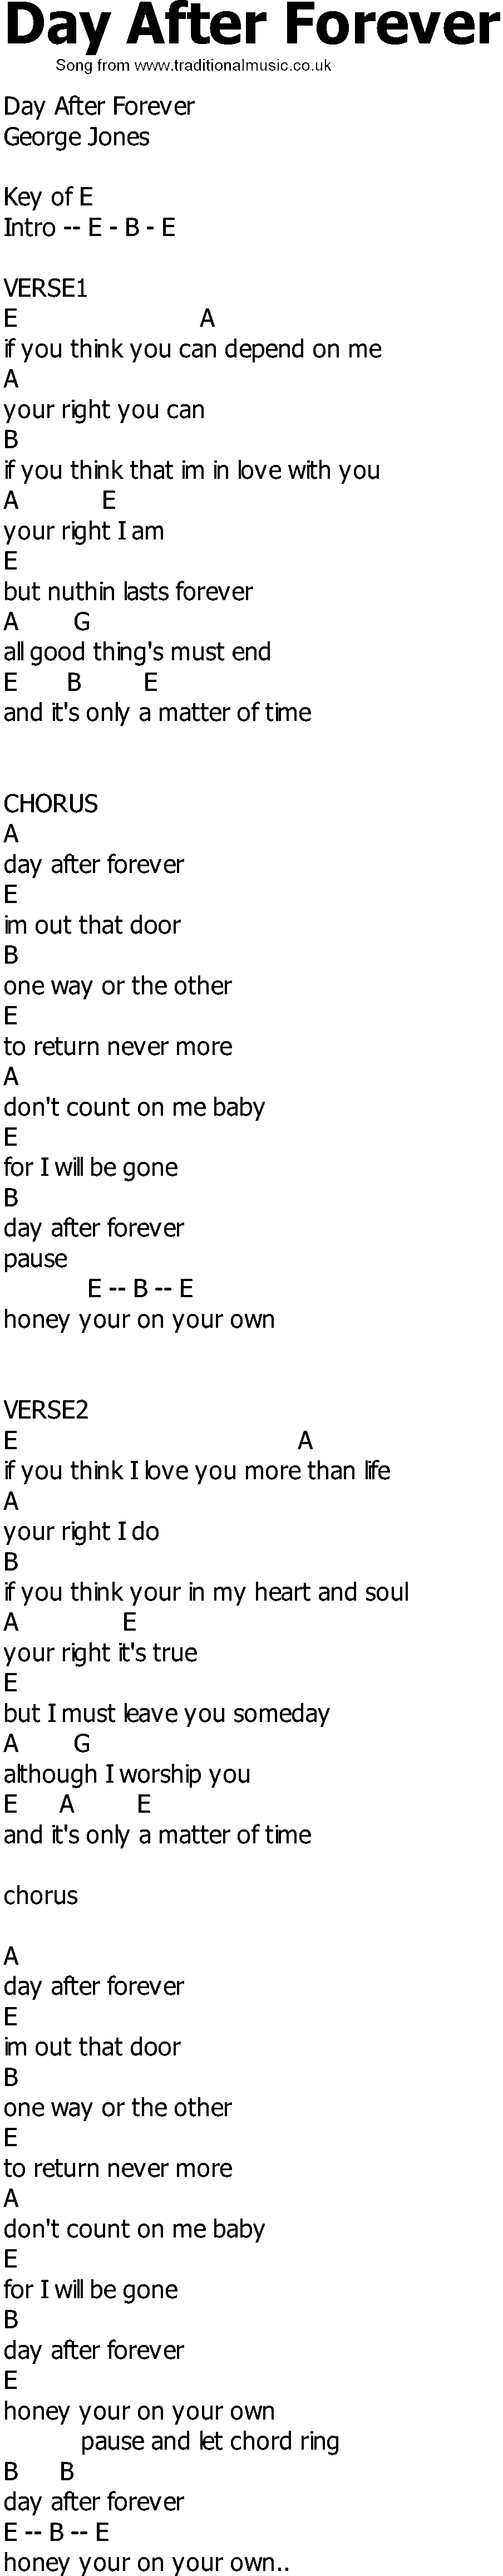 Old Country song lyrics with chords - Day After Forever